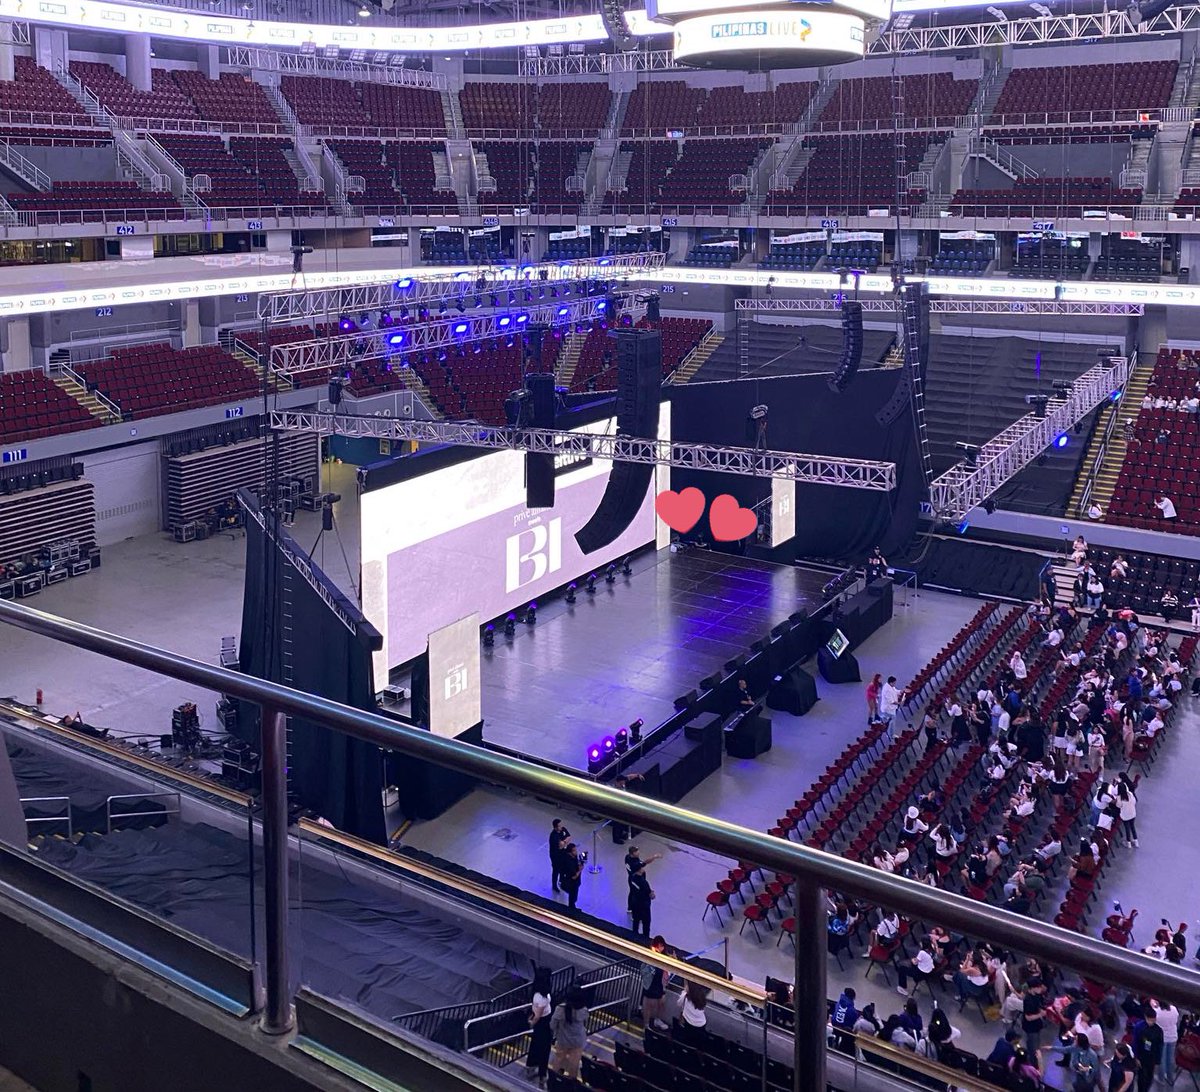 Here's a reference view of Upperbox 405 for ENHYPEN bench fanmeeting. Nahalungkat ko sa gallery q. This was during B.I's fm